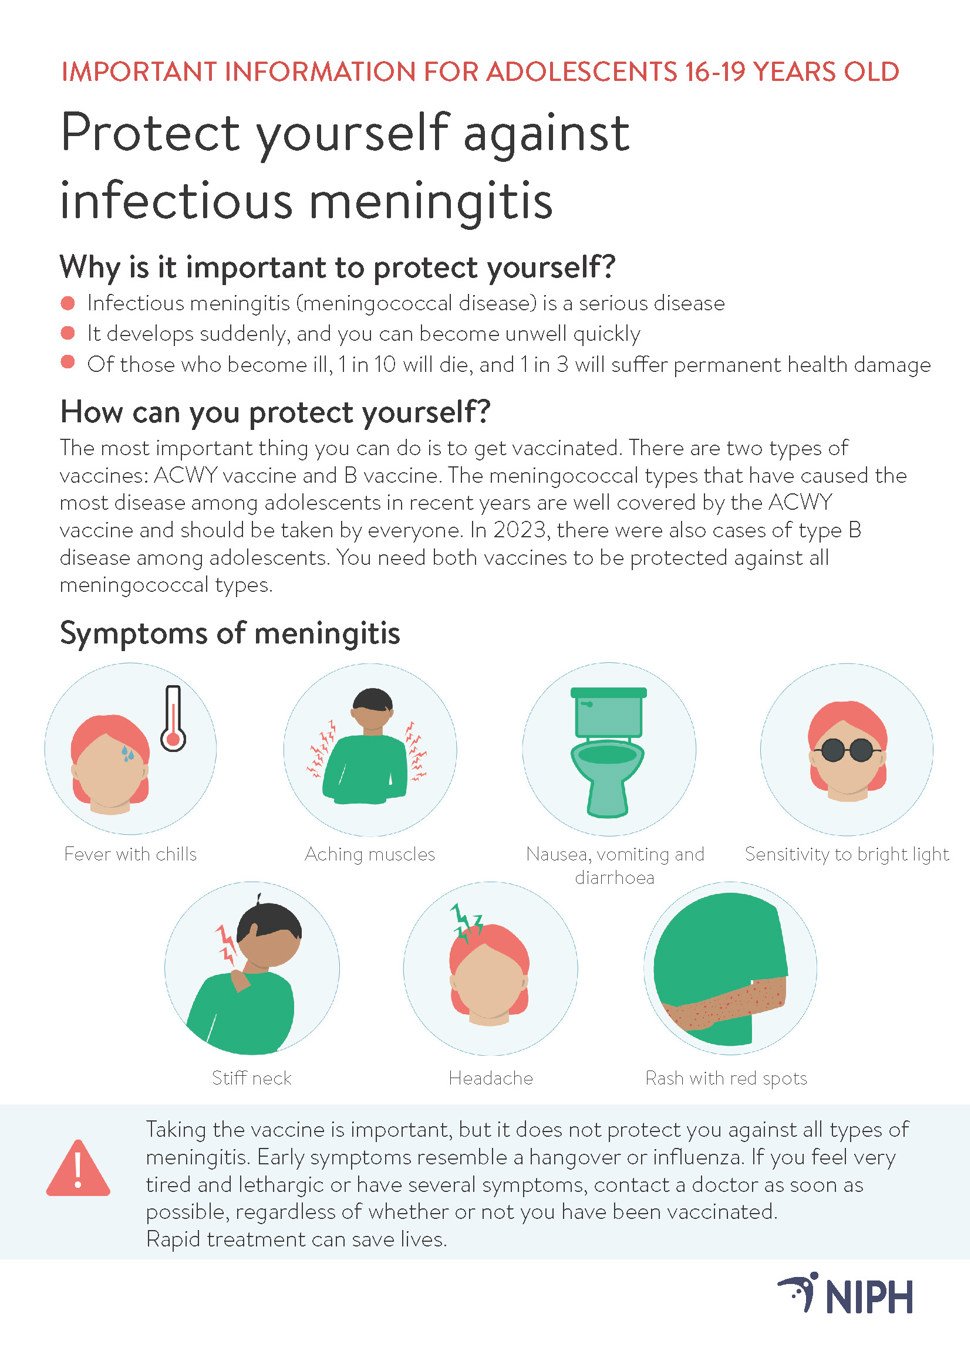 Poster about protetcting yourself from infectious meningitis